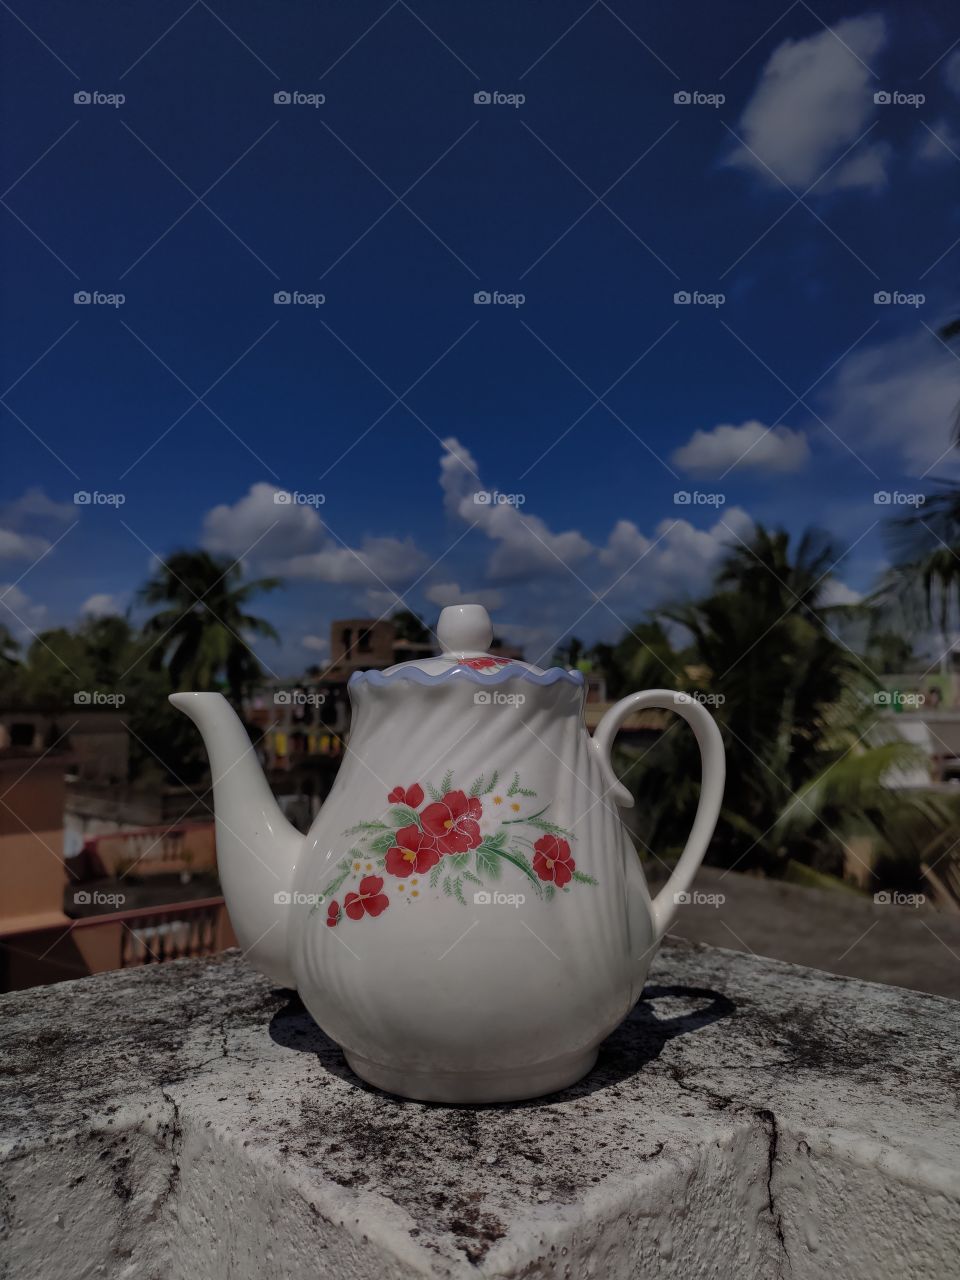 Raw photo of a tea kettle with a bright blue sky with clouds as a background.